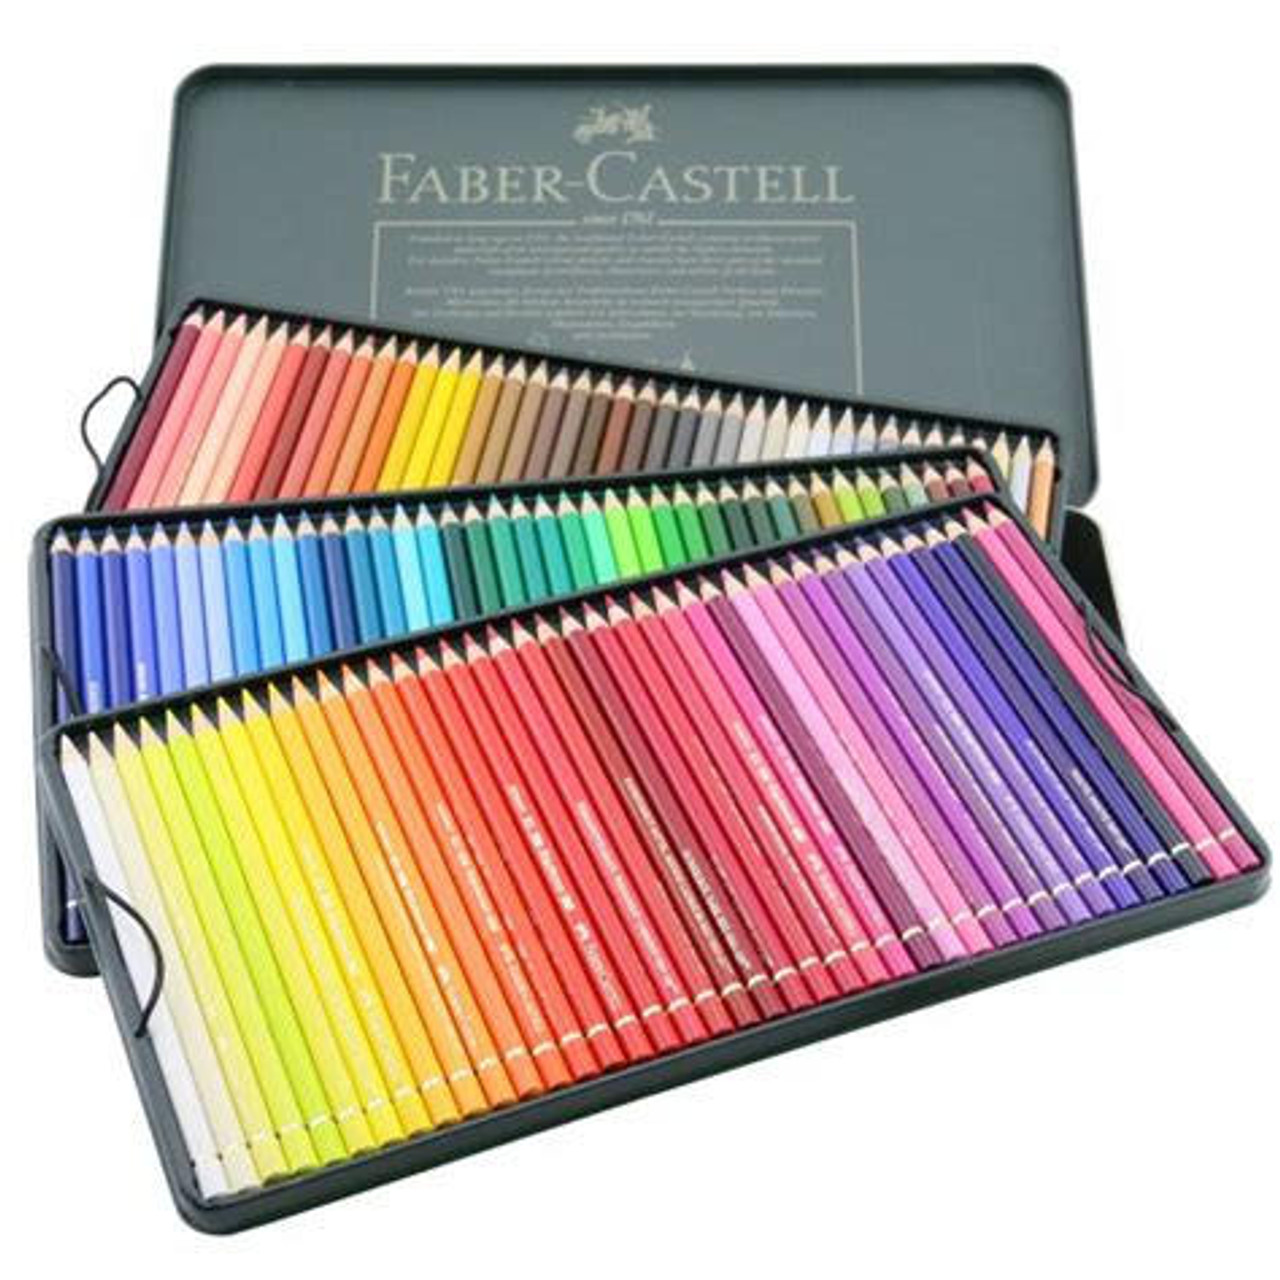 https://cdn11.bigcommerce.com/s-9uf88xhege/images/stencil/1280x1280/products/5668/77662/faber-castell-polychromos-colour-pencil-set-of-120__47163.1680306534.jpg?c=1?imbypass=on